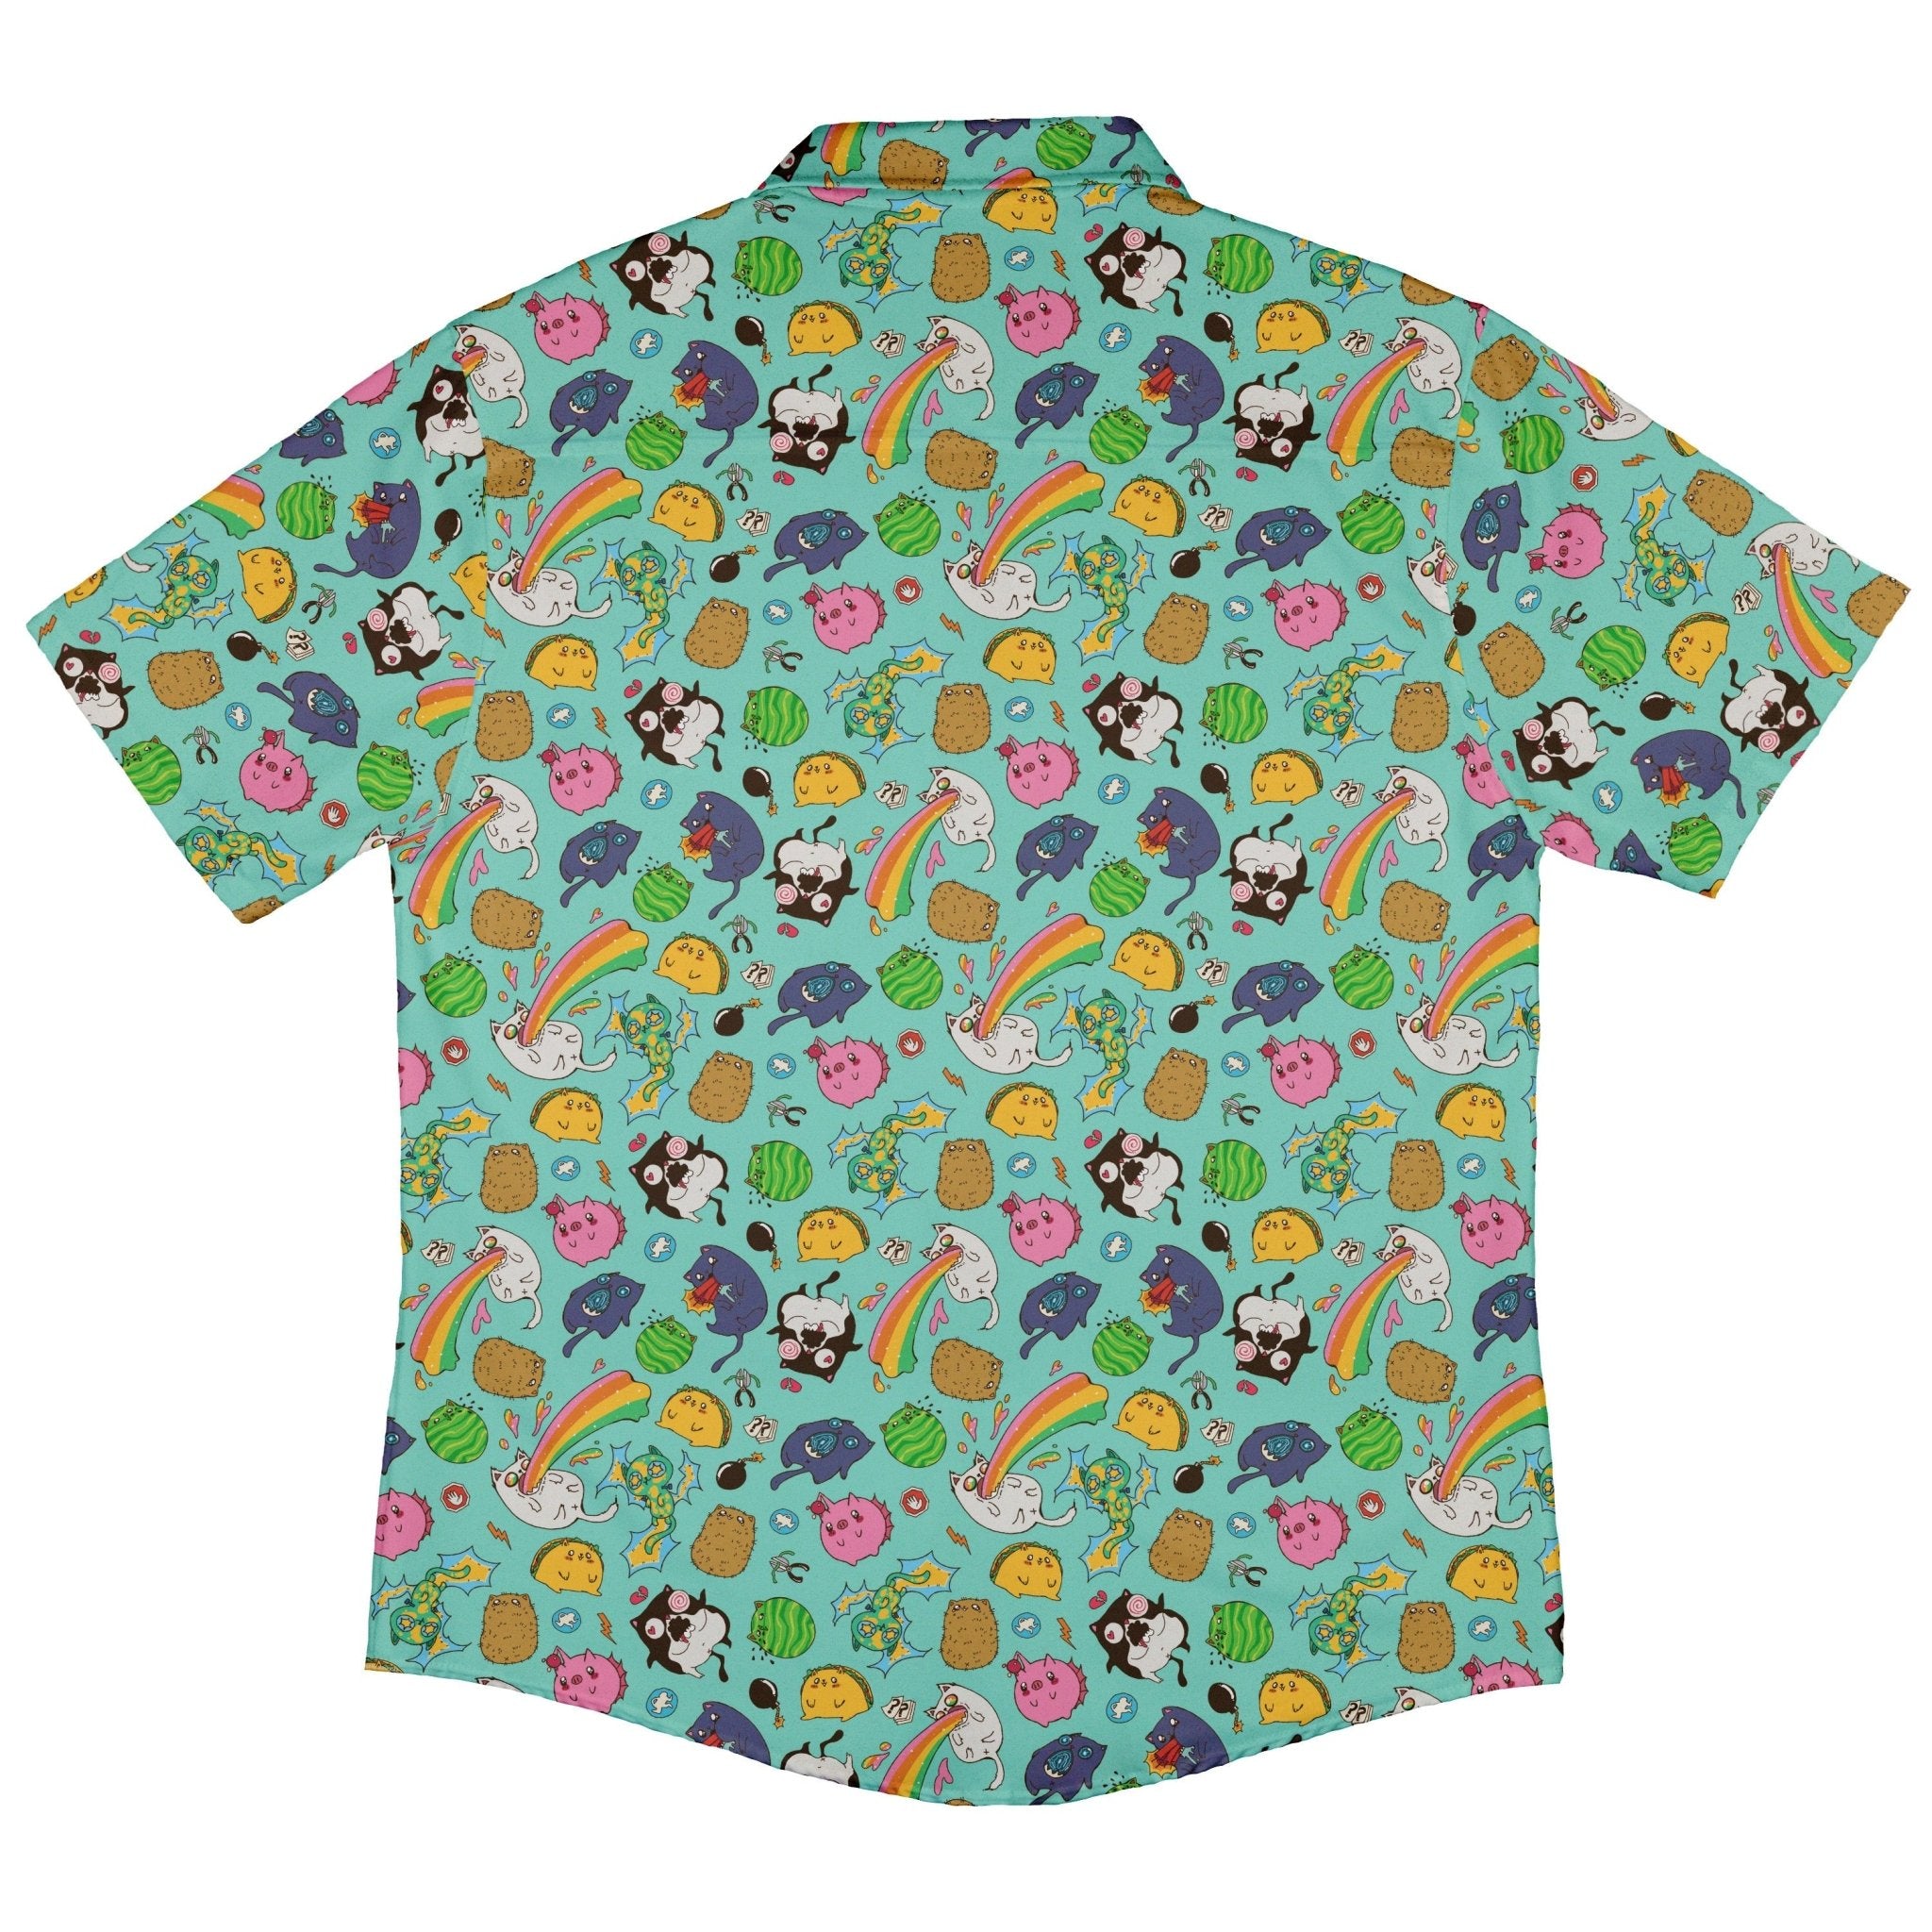 Anime Exploding Kittens Button Up Shirt - adult sizing - Animal Patterns - Anime